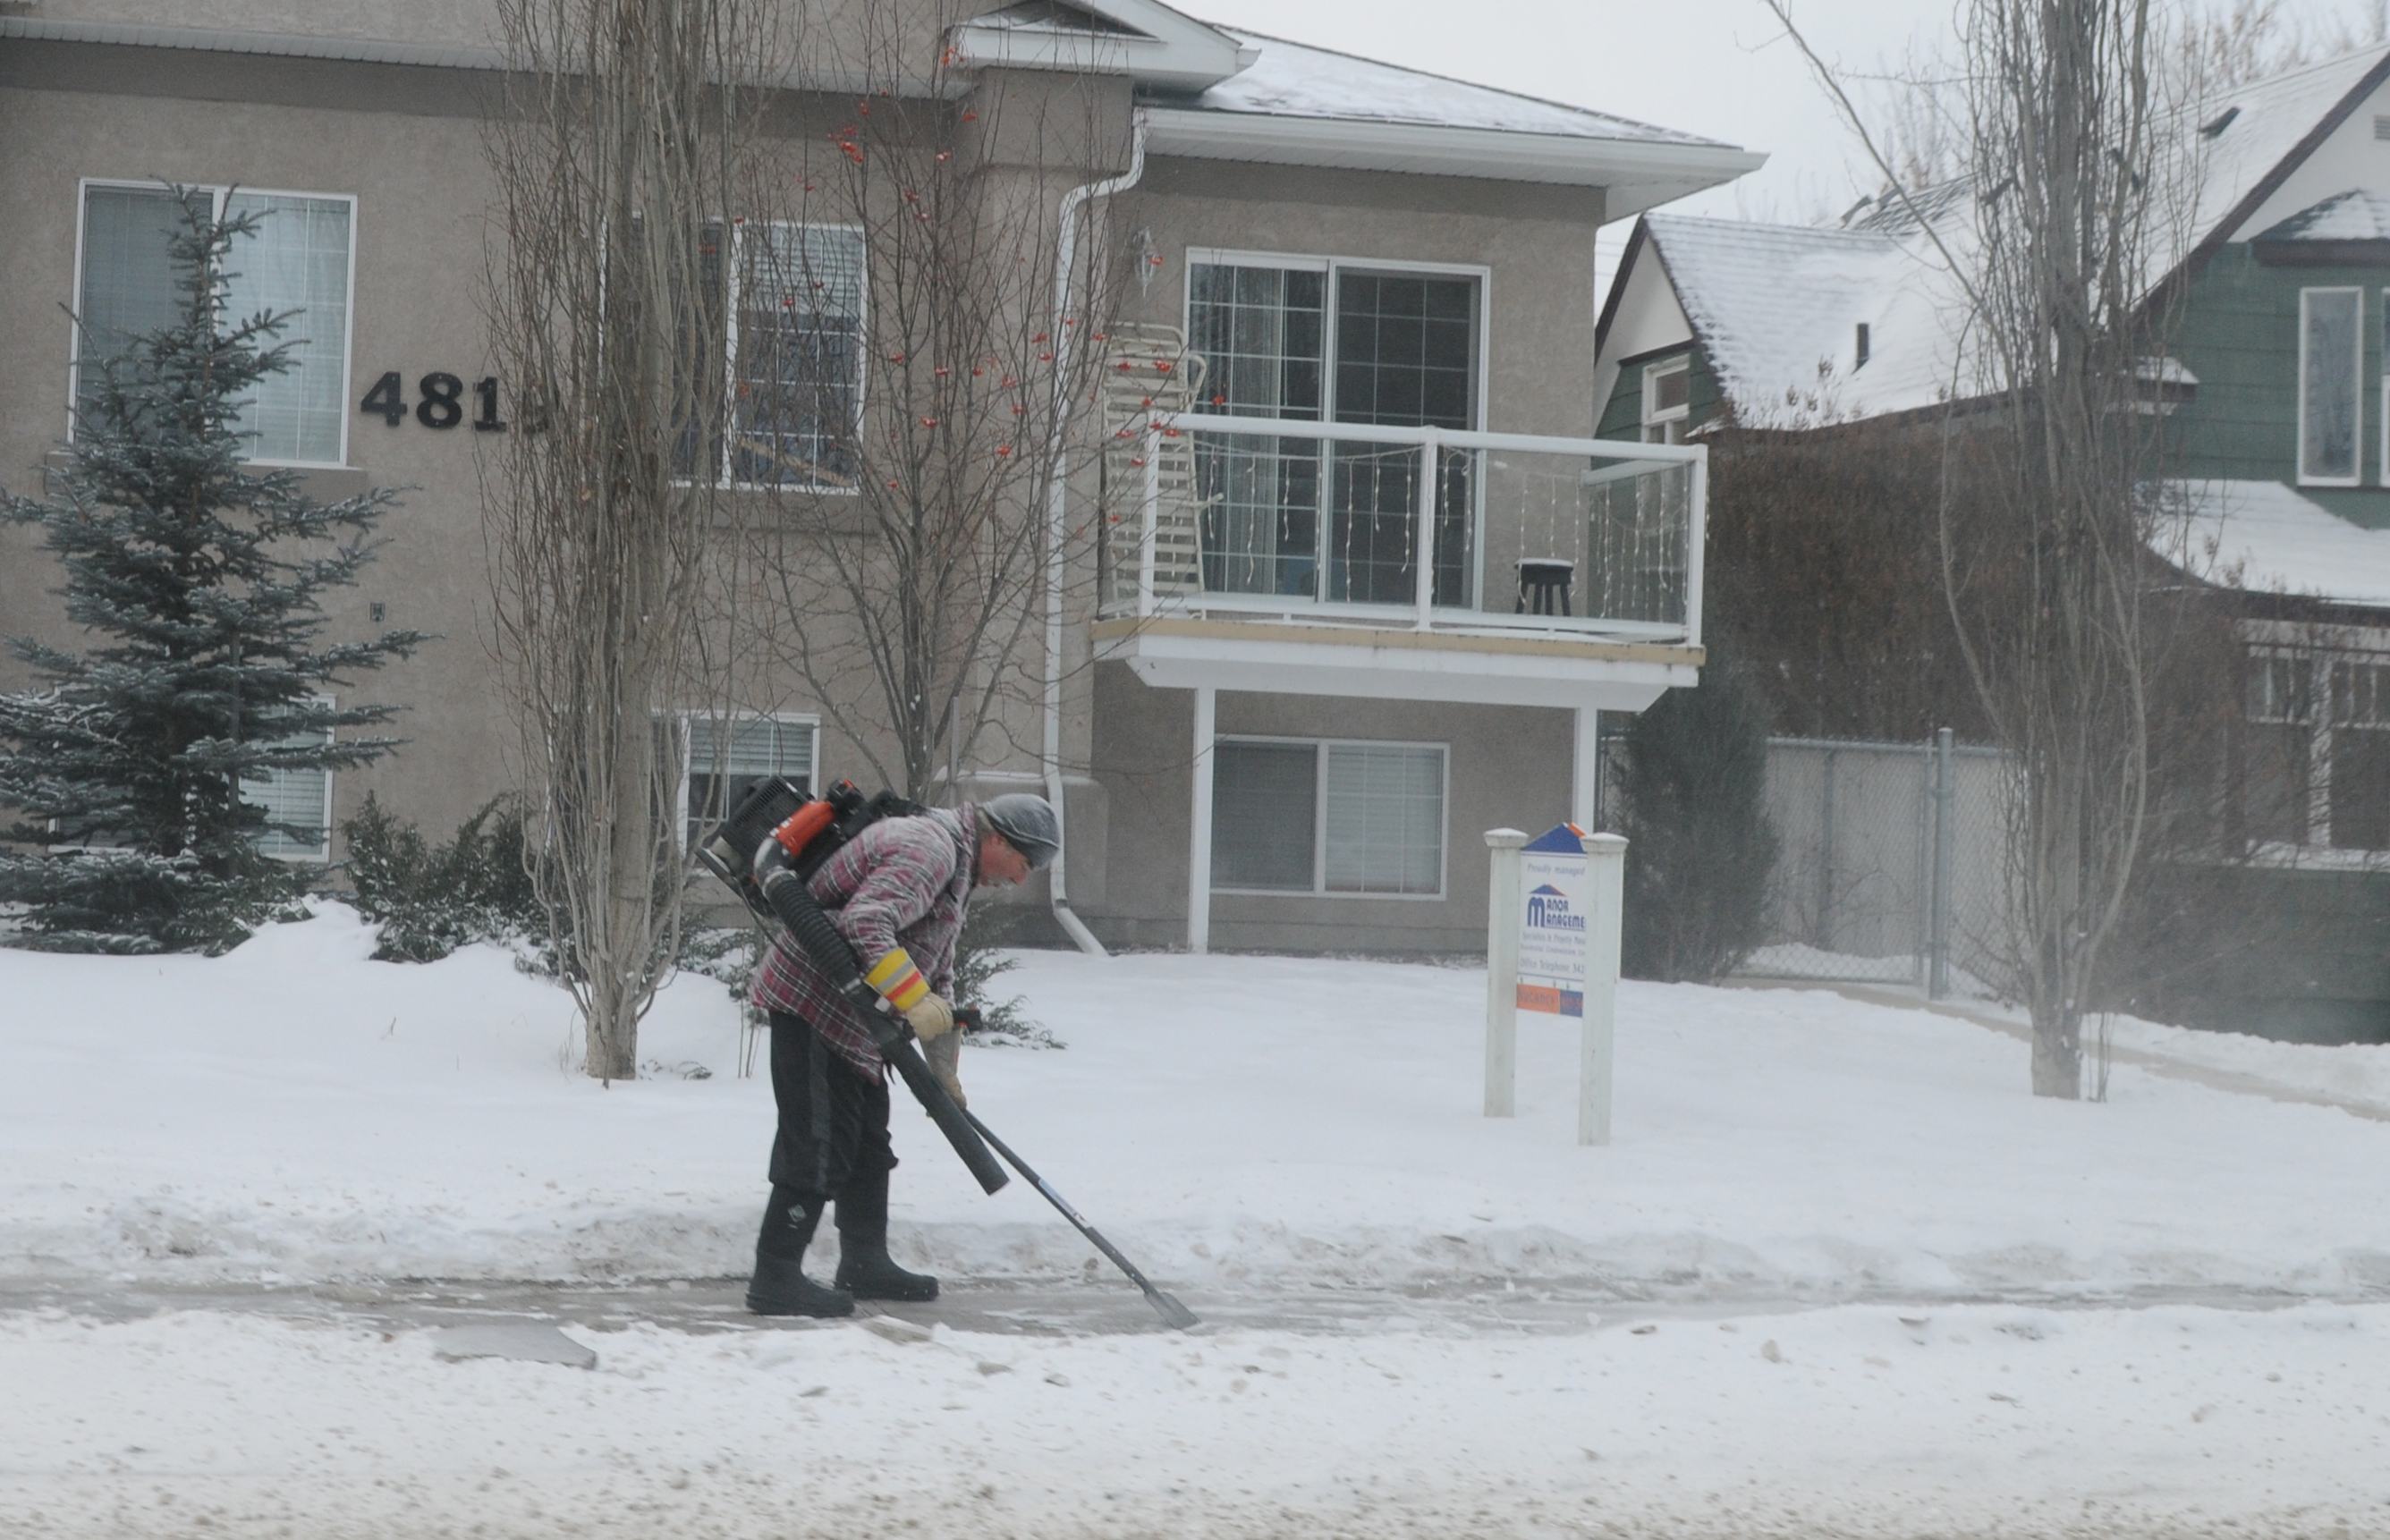 SAFETY- A man works on scraping the many layers of ice on a sidewalk for pedestrians recently.